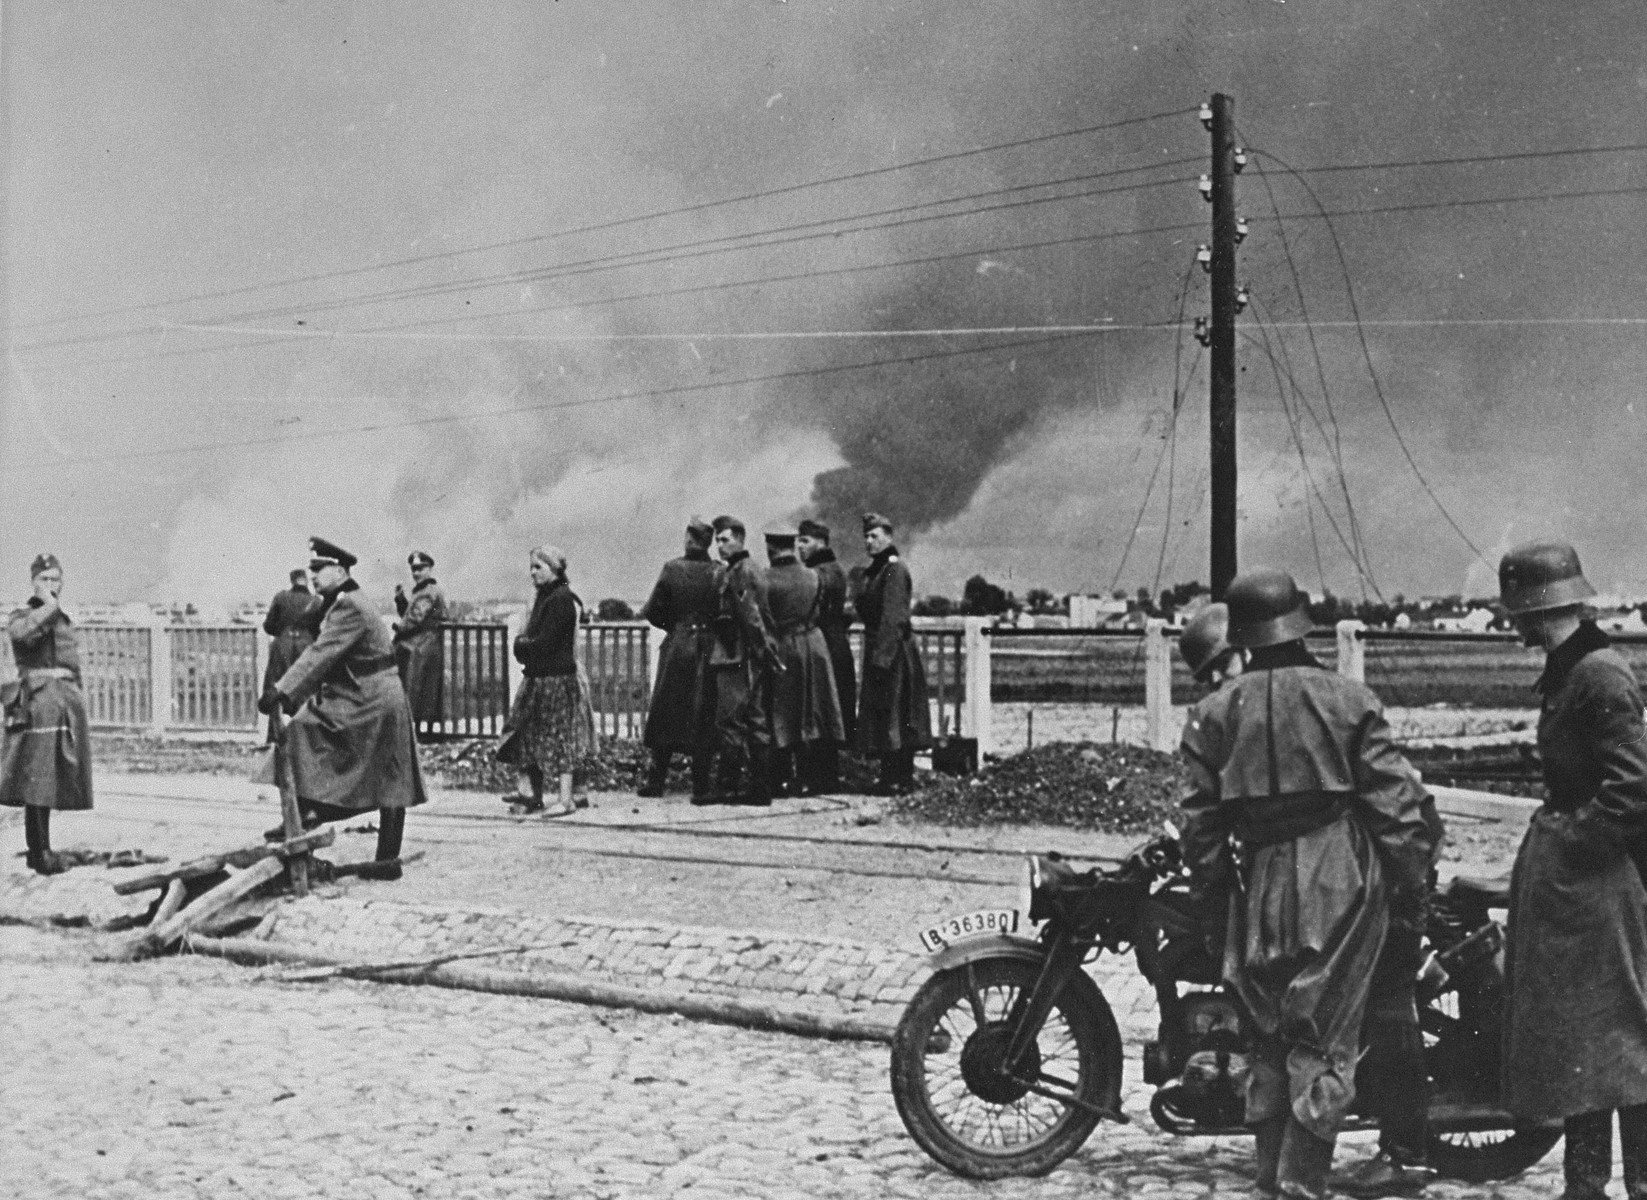 German troops and Polish civilians stop on a bridge on the outskirts of Warsaw, as smoke rises from the burning city.